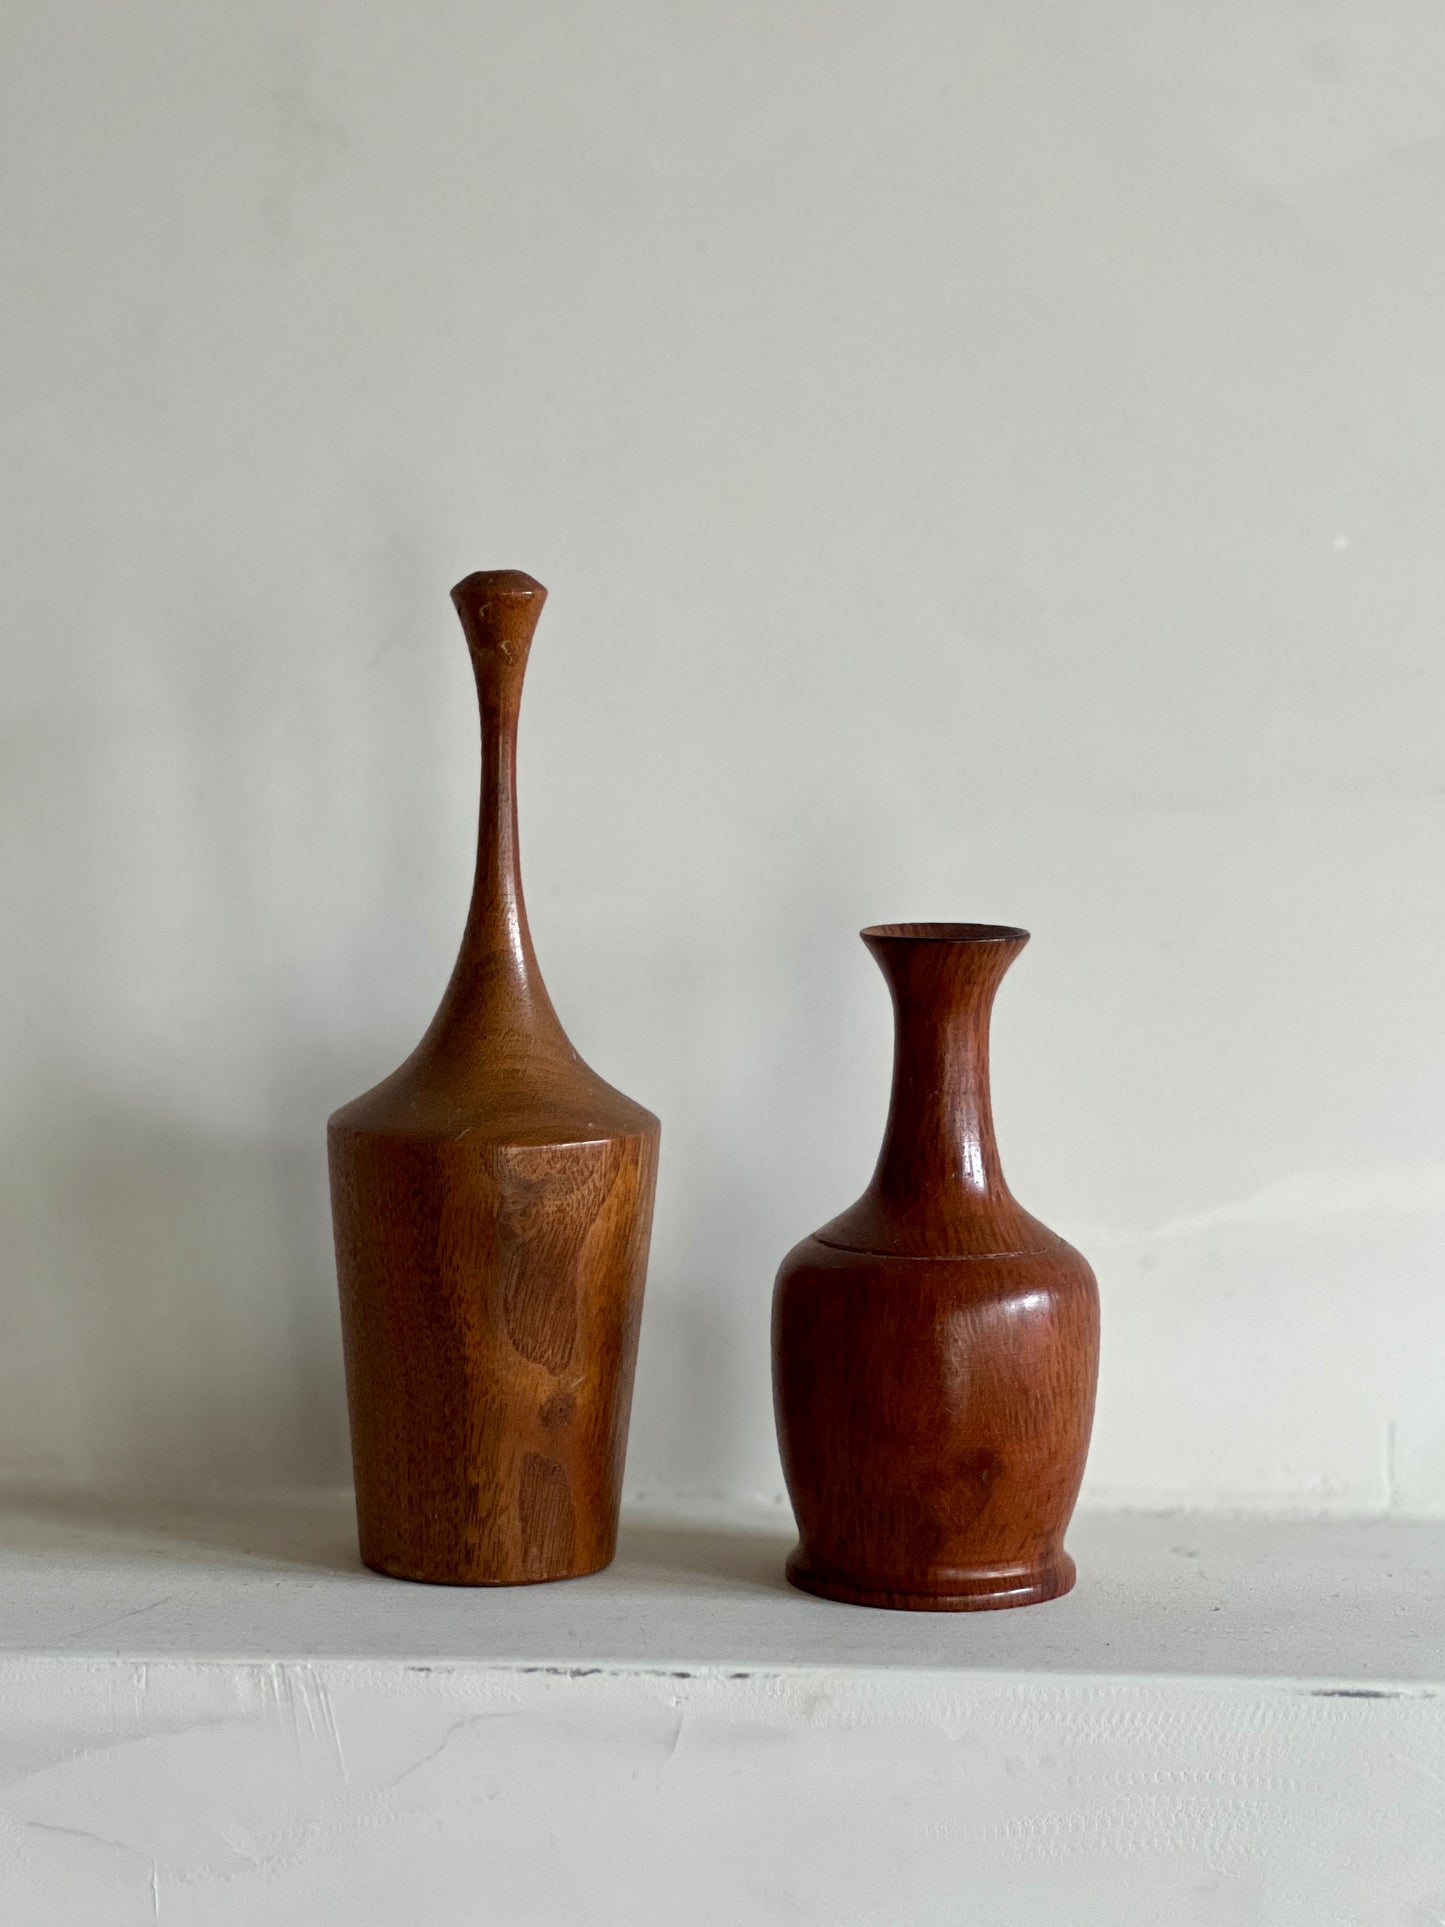 Pair of vintage wooden bud vases | reserve for Libby